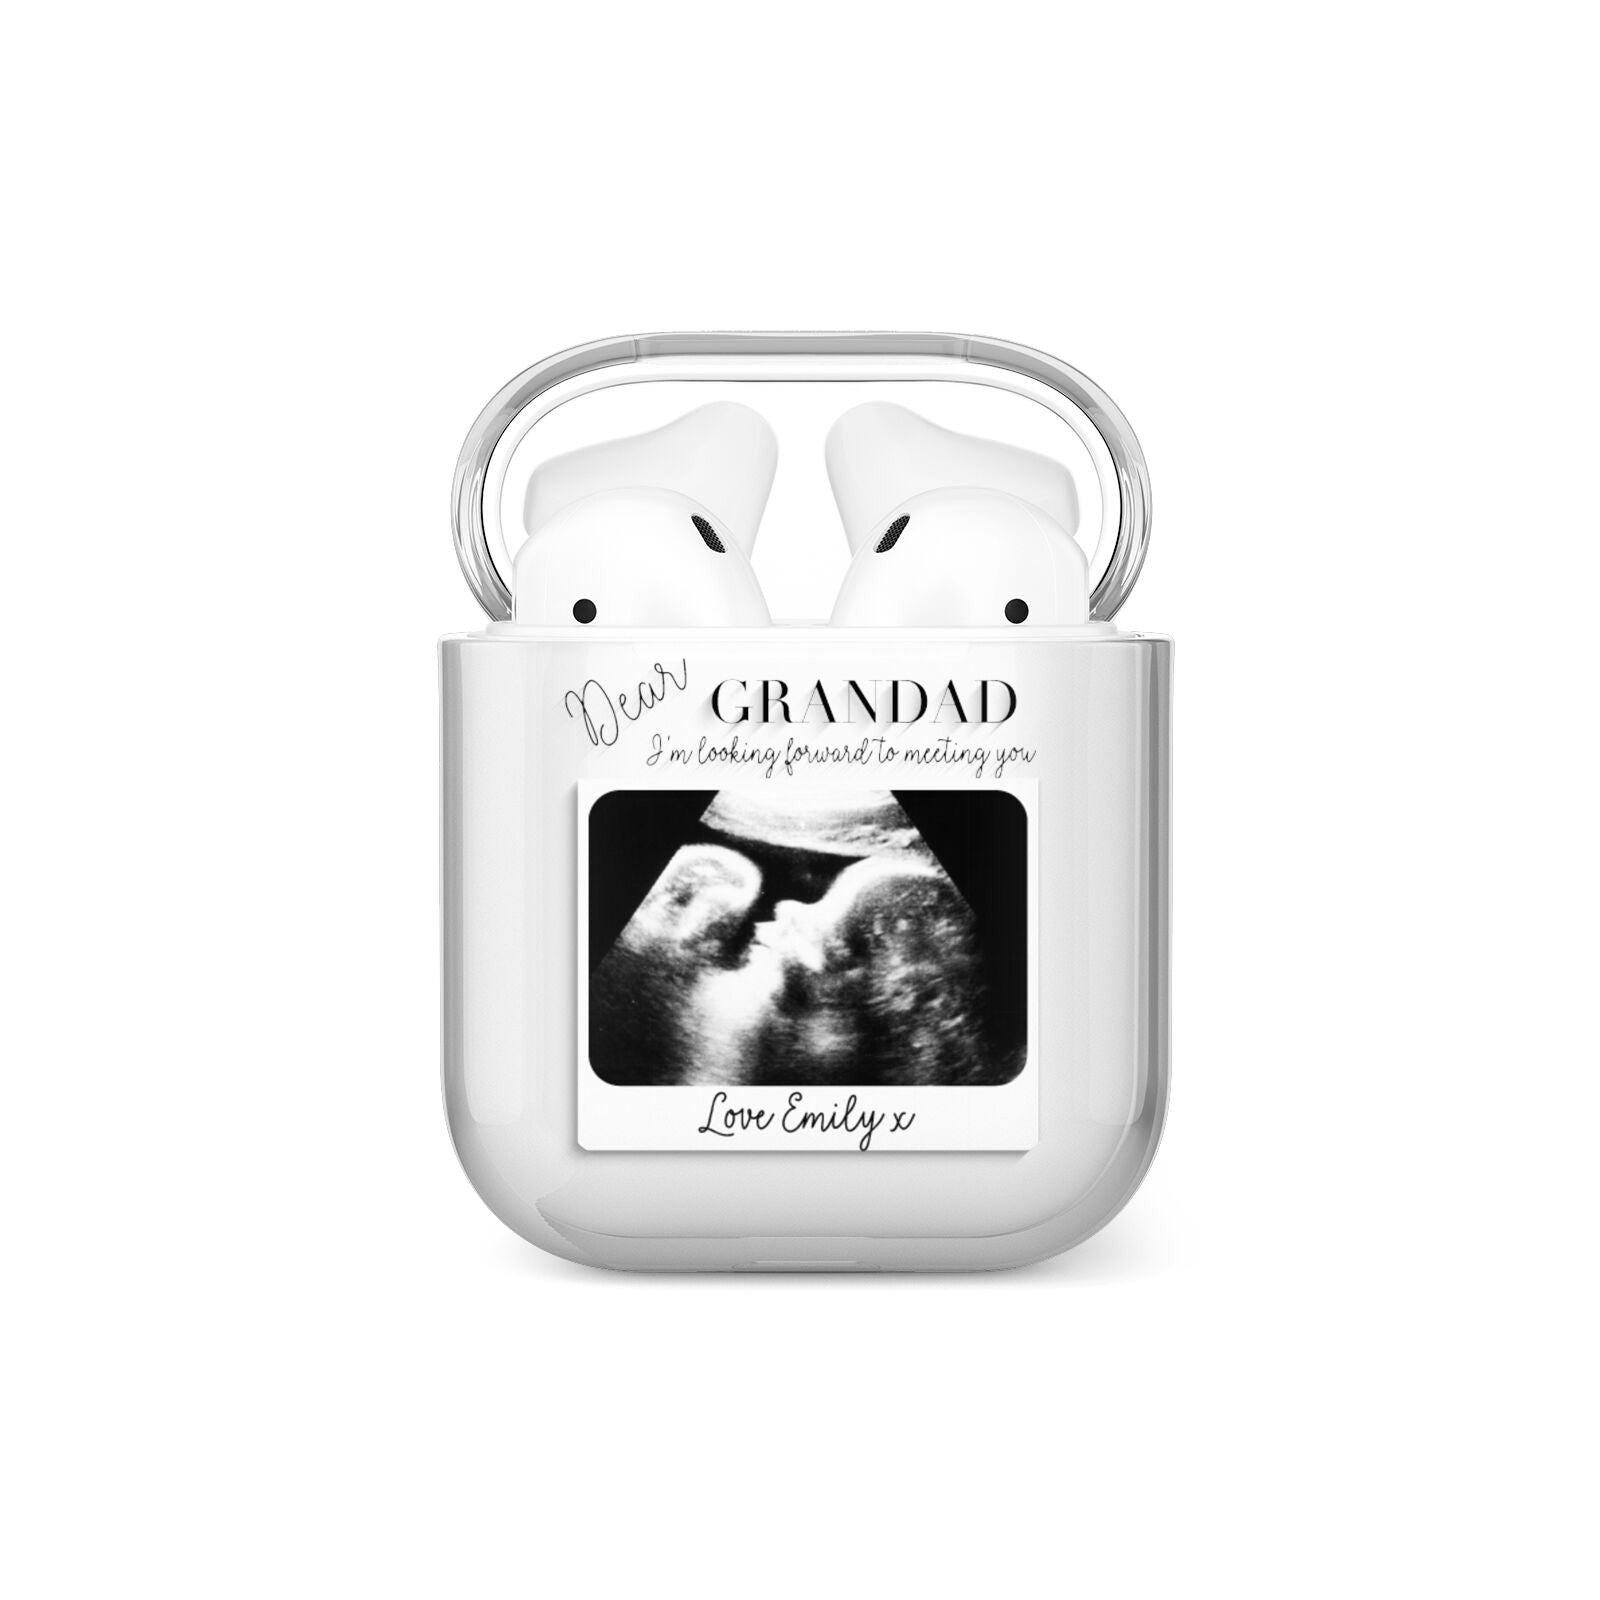 Personalised Baby Scan Photo Upload AirPods Case